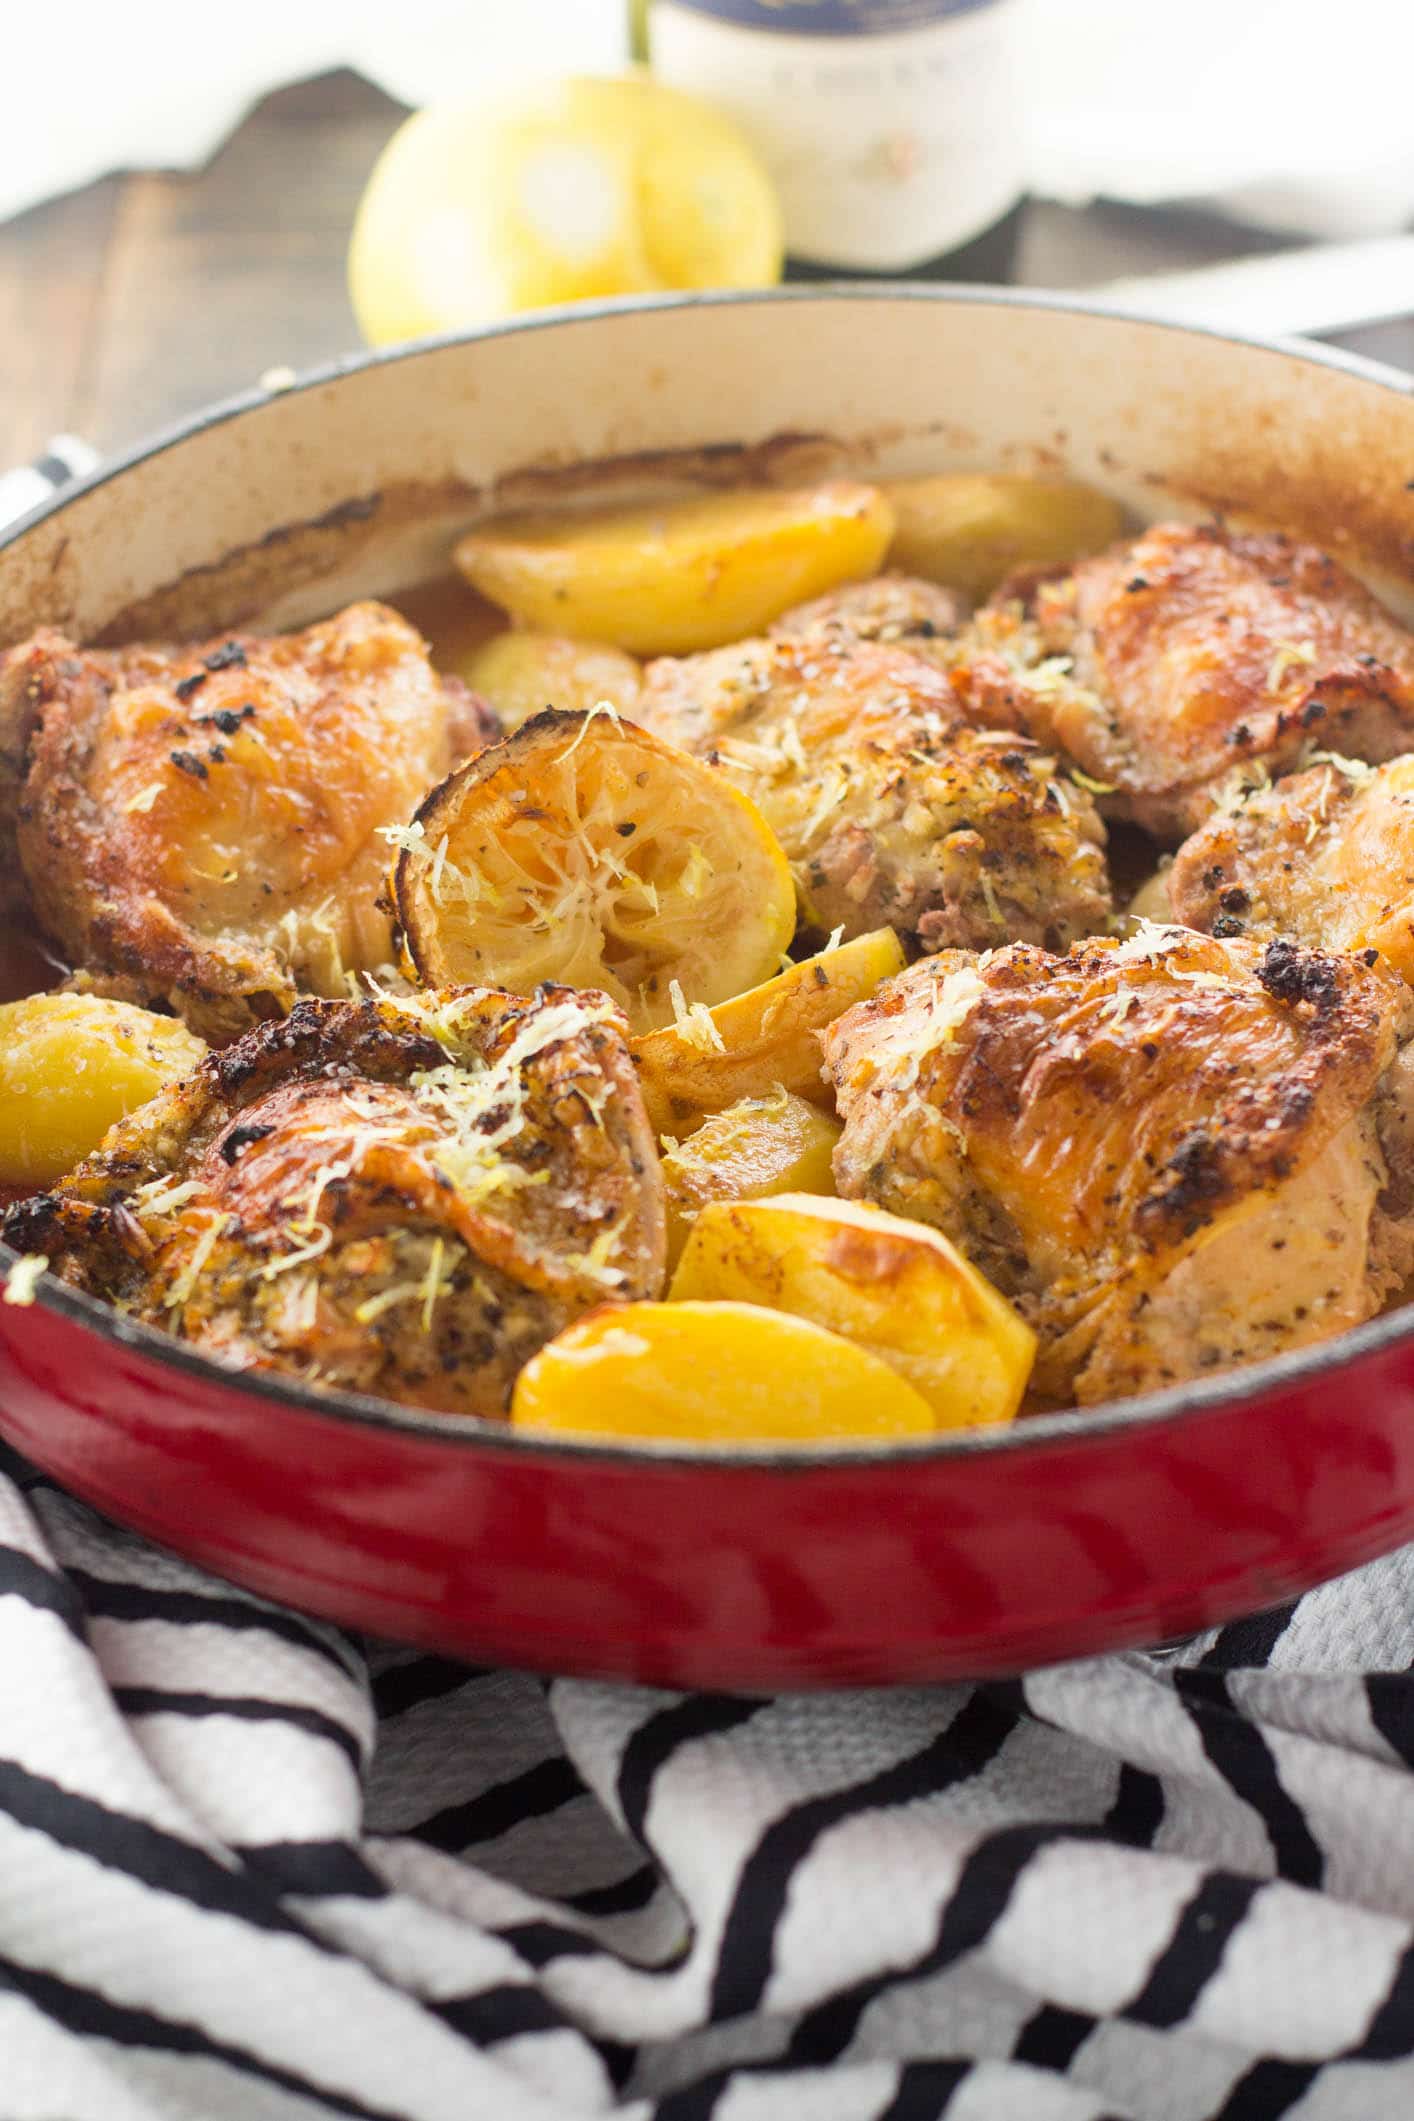 My One Pot Greek Chicken is full of bright lemony flavors and super tender potatoes. All made in one pot with maximum flavor and minimum clean-up!